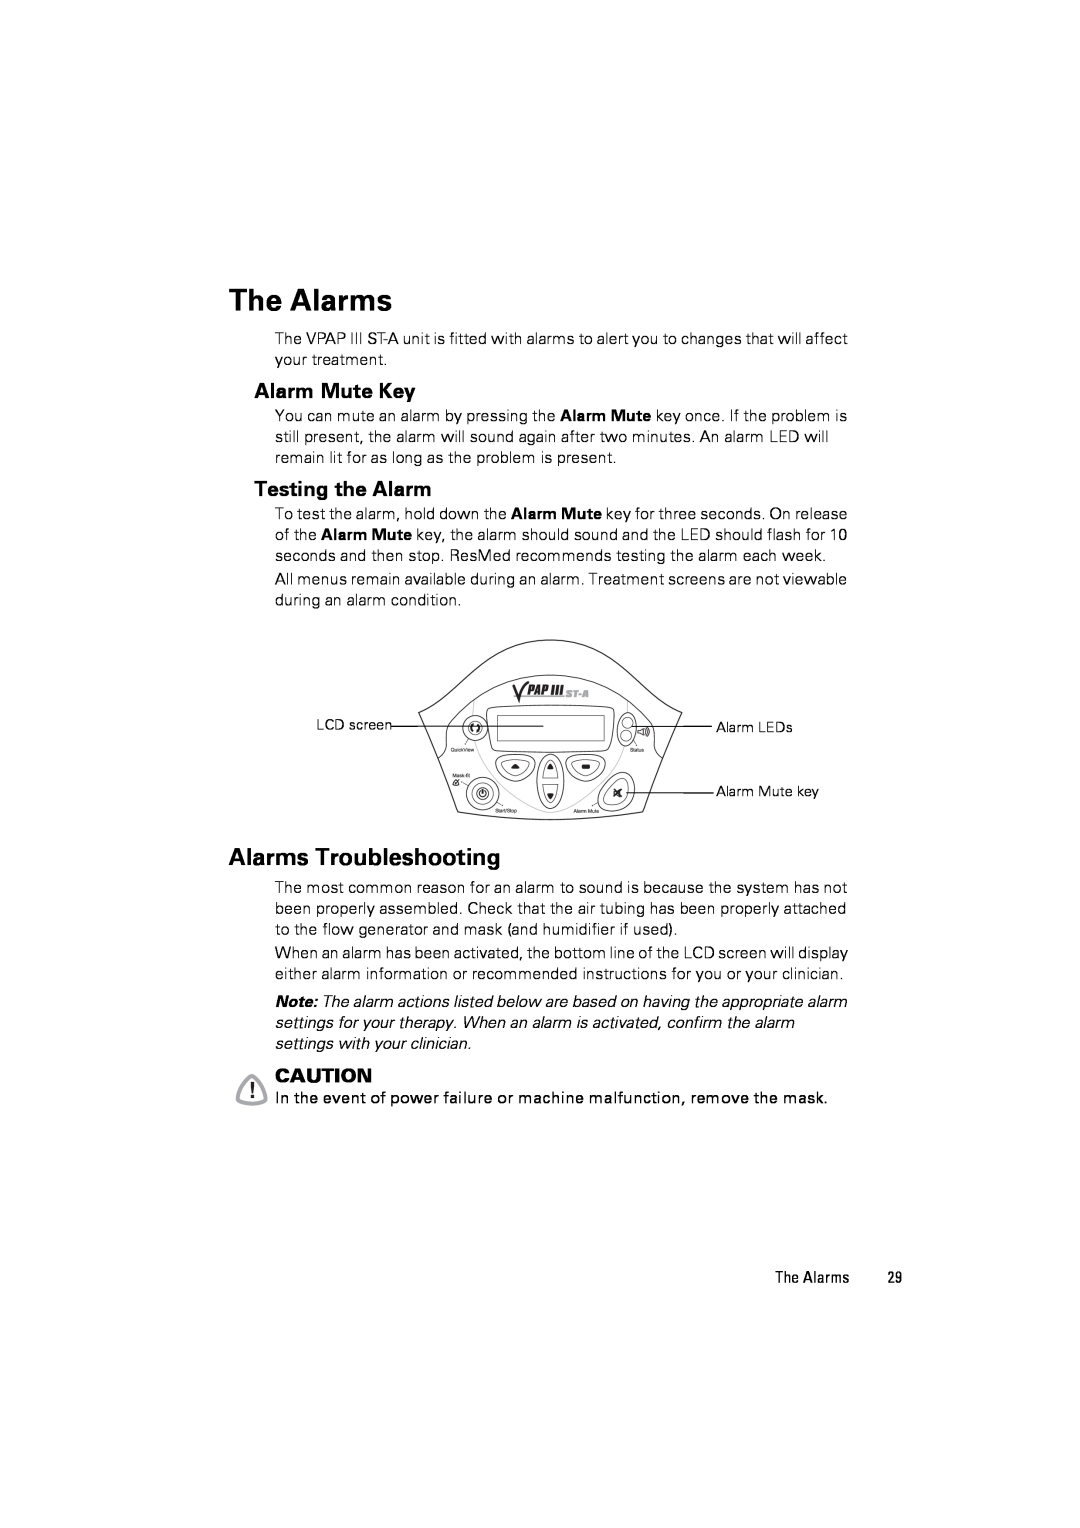 ResMed III ST-A user manual The Alarms, Alarms Troubleshooting, Alarm Mute Key, Testing the Alarm 